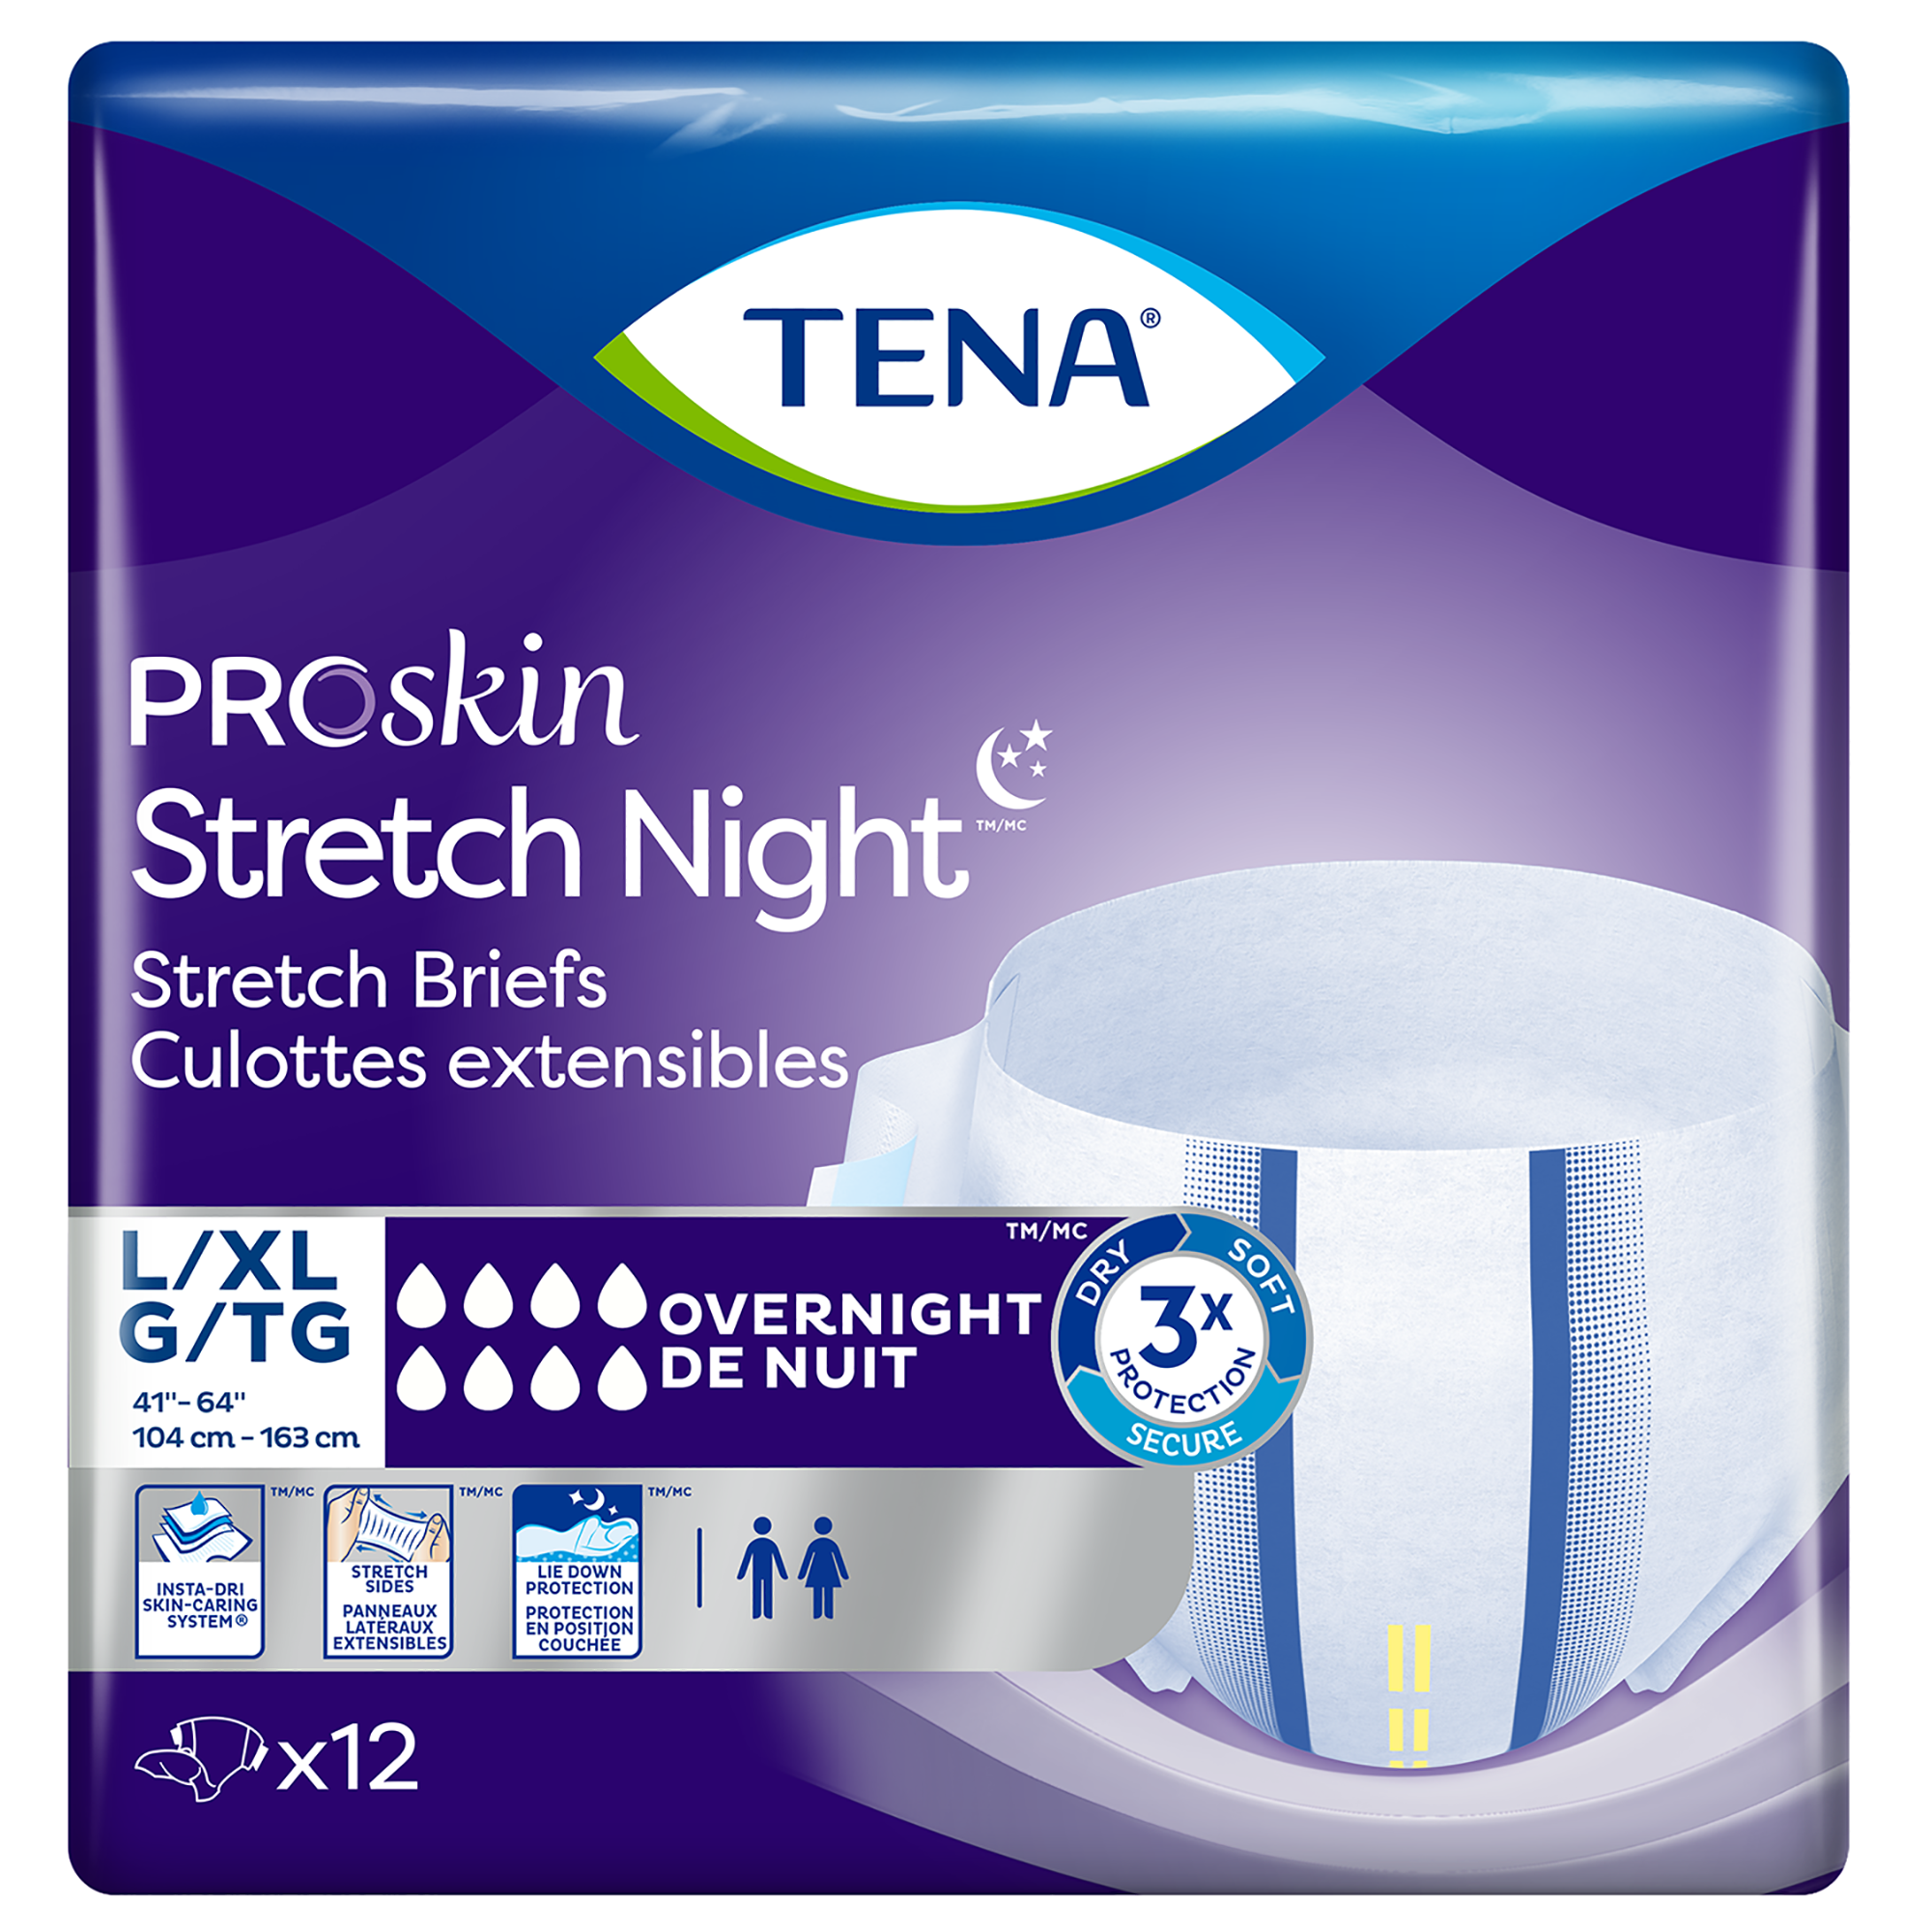 TENA Proskin Stretch Unisex Overnight Brief for Incontinence - Large/Extra  Large - 12s